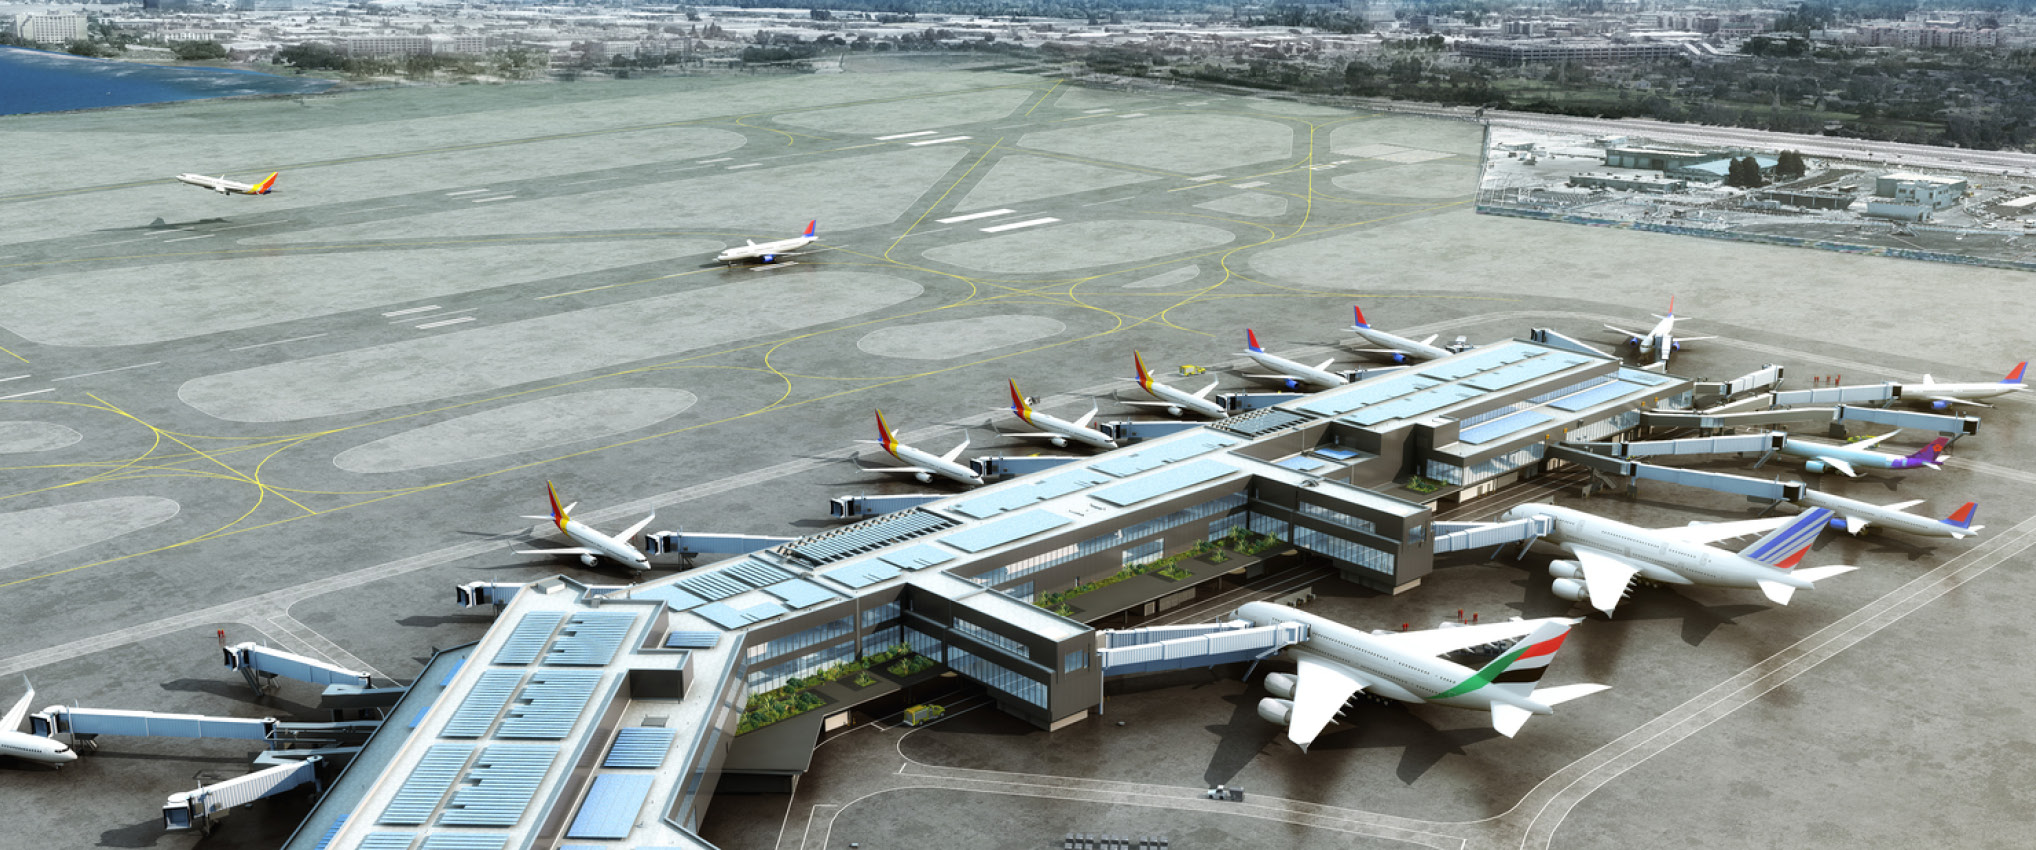 “Big Room” Collaboration Turns SFO’s Vision for Airport Planning Into Reality